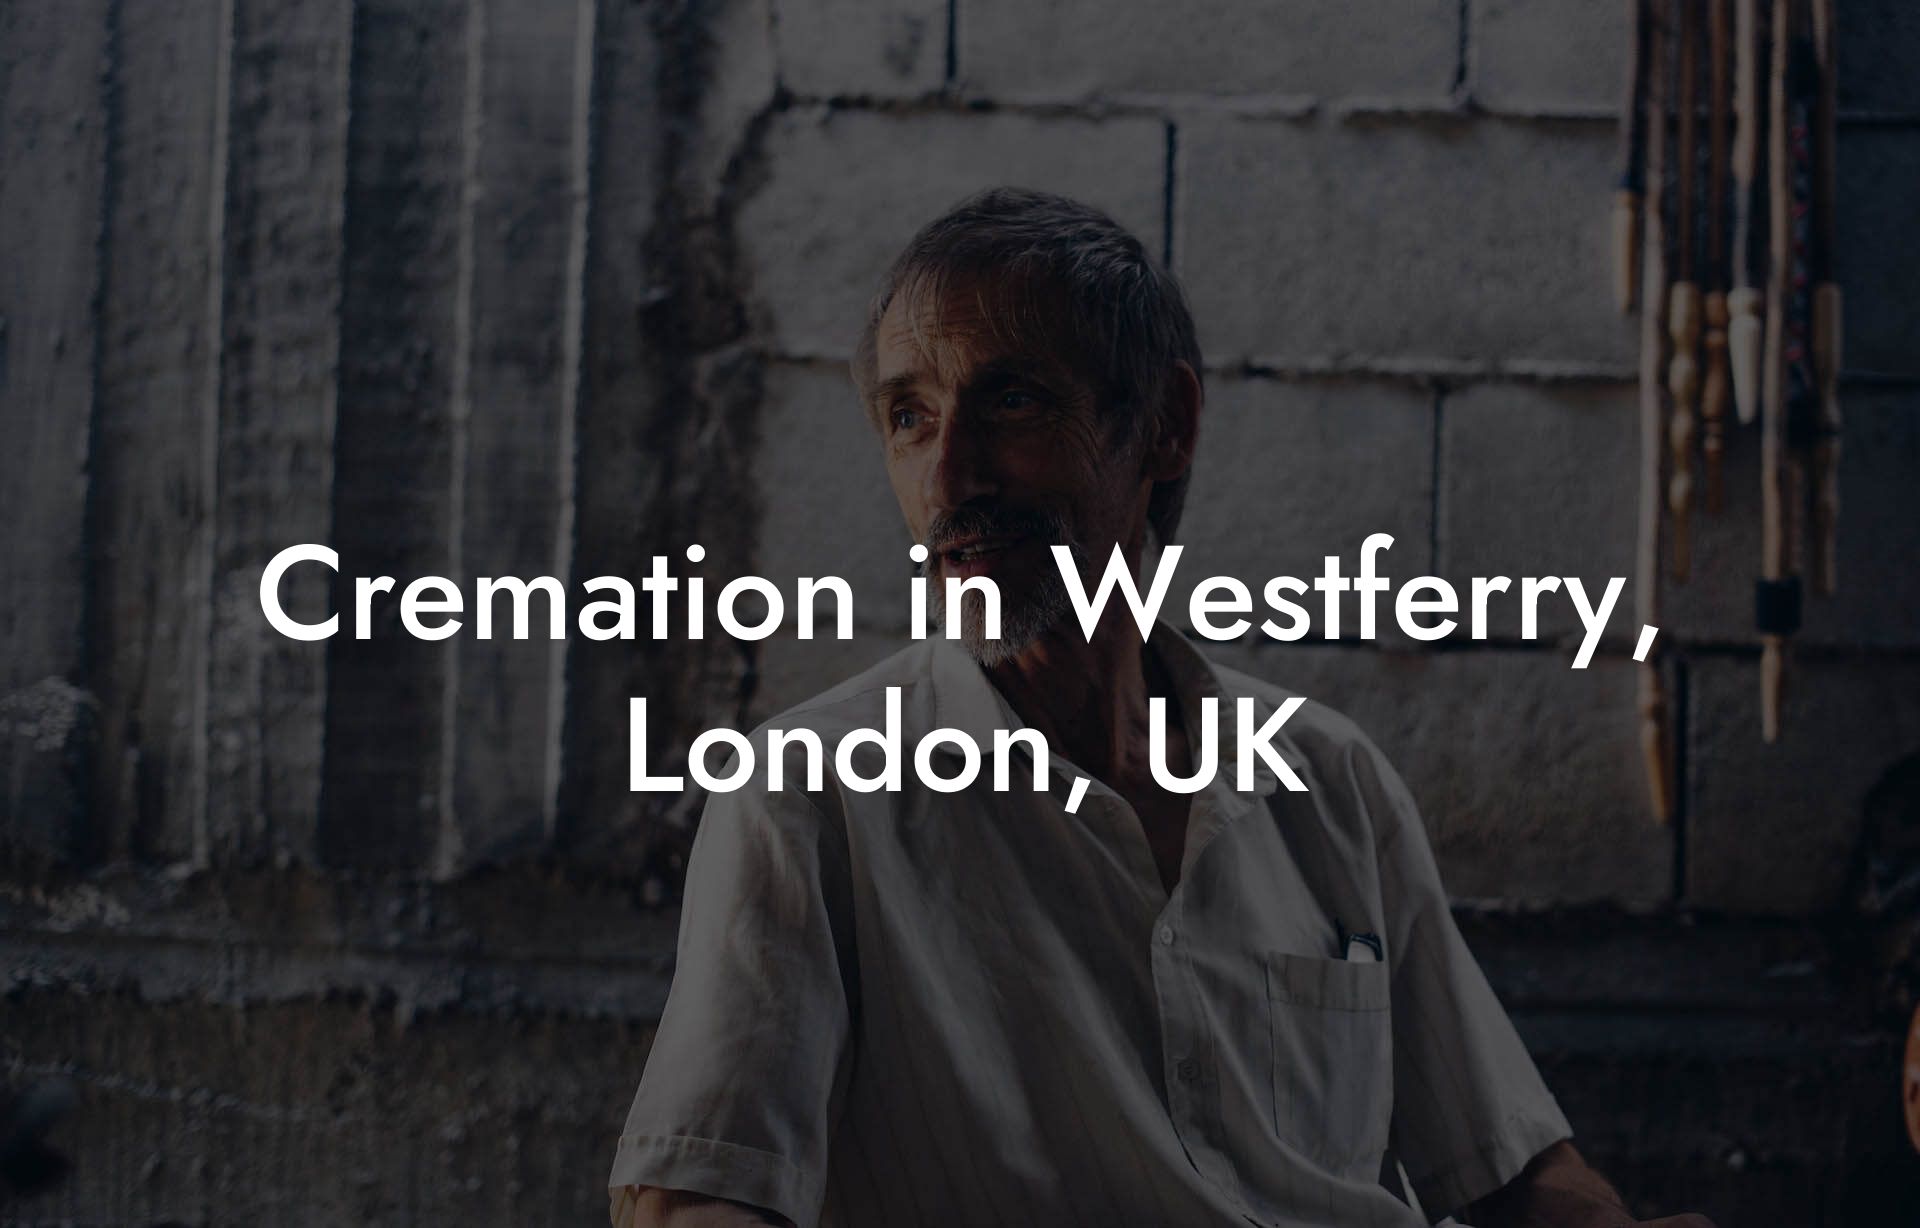 Cremation in Westferry, London, UK